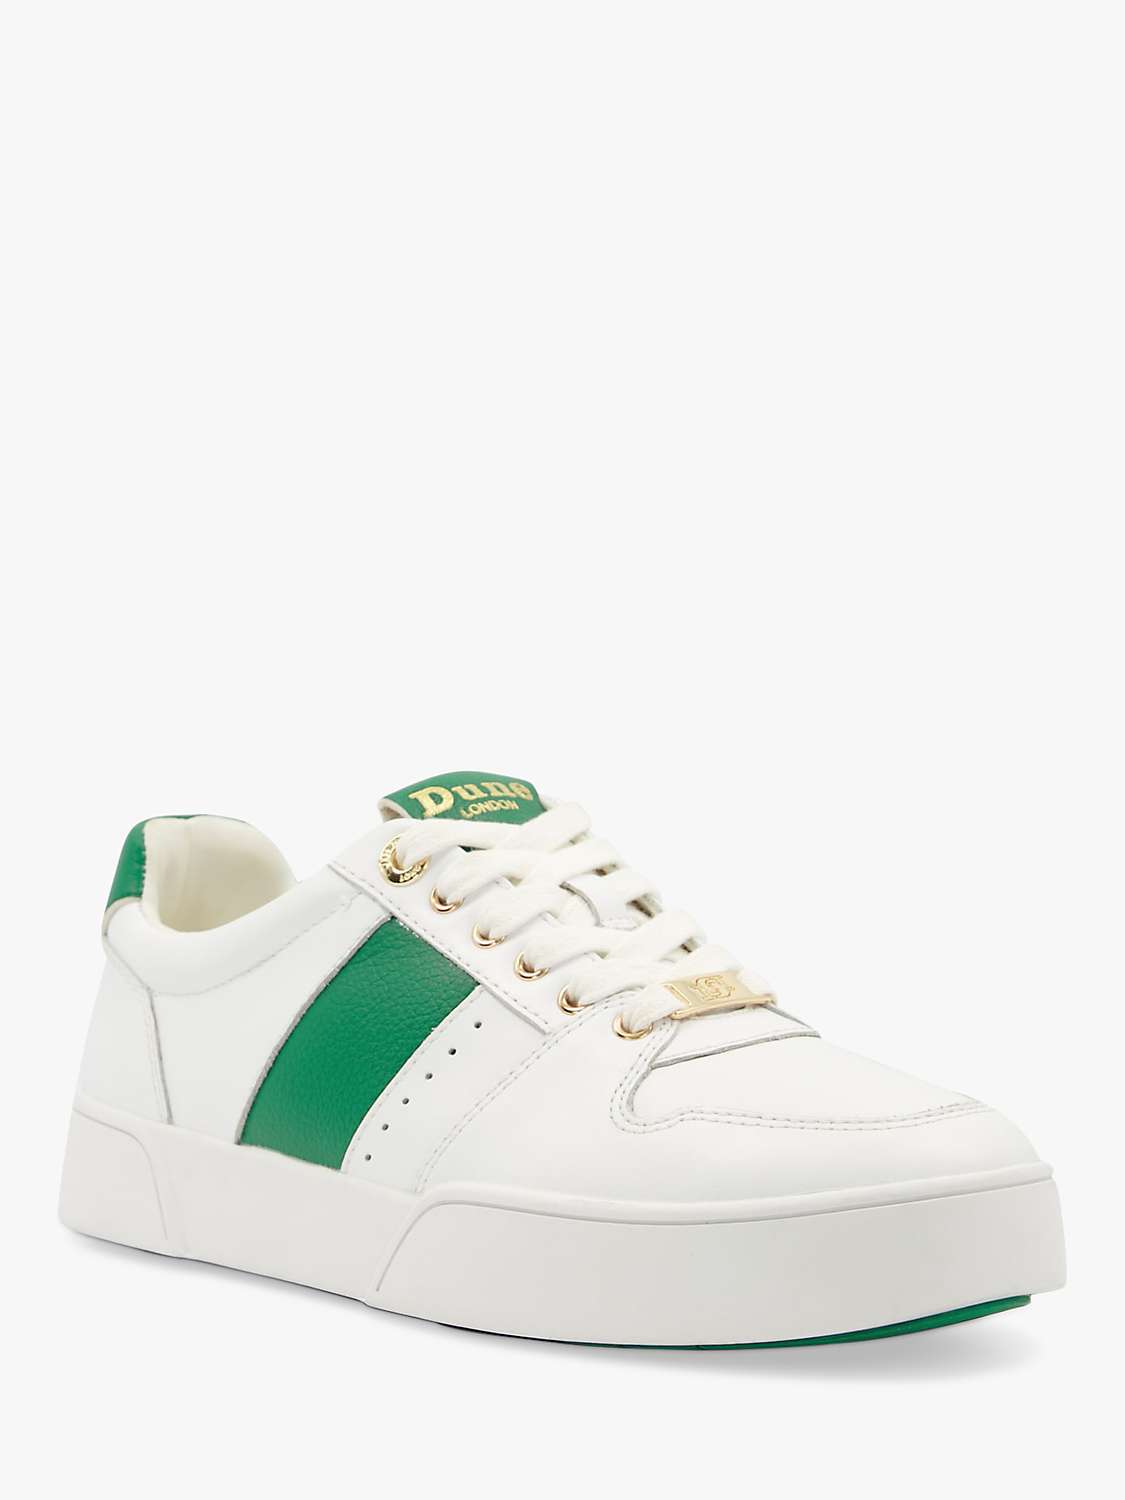 Buy Dune Elysium Leather Side Stripe Trainers Online at johnlewis.com